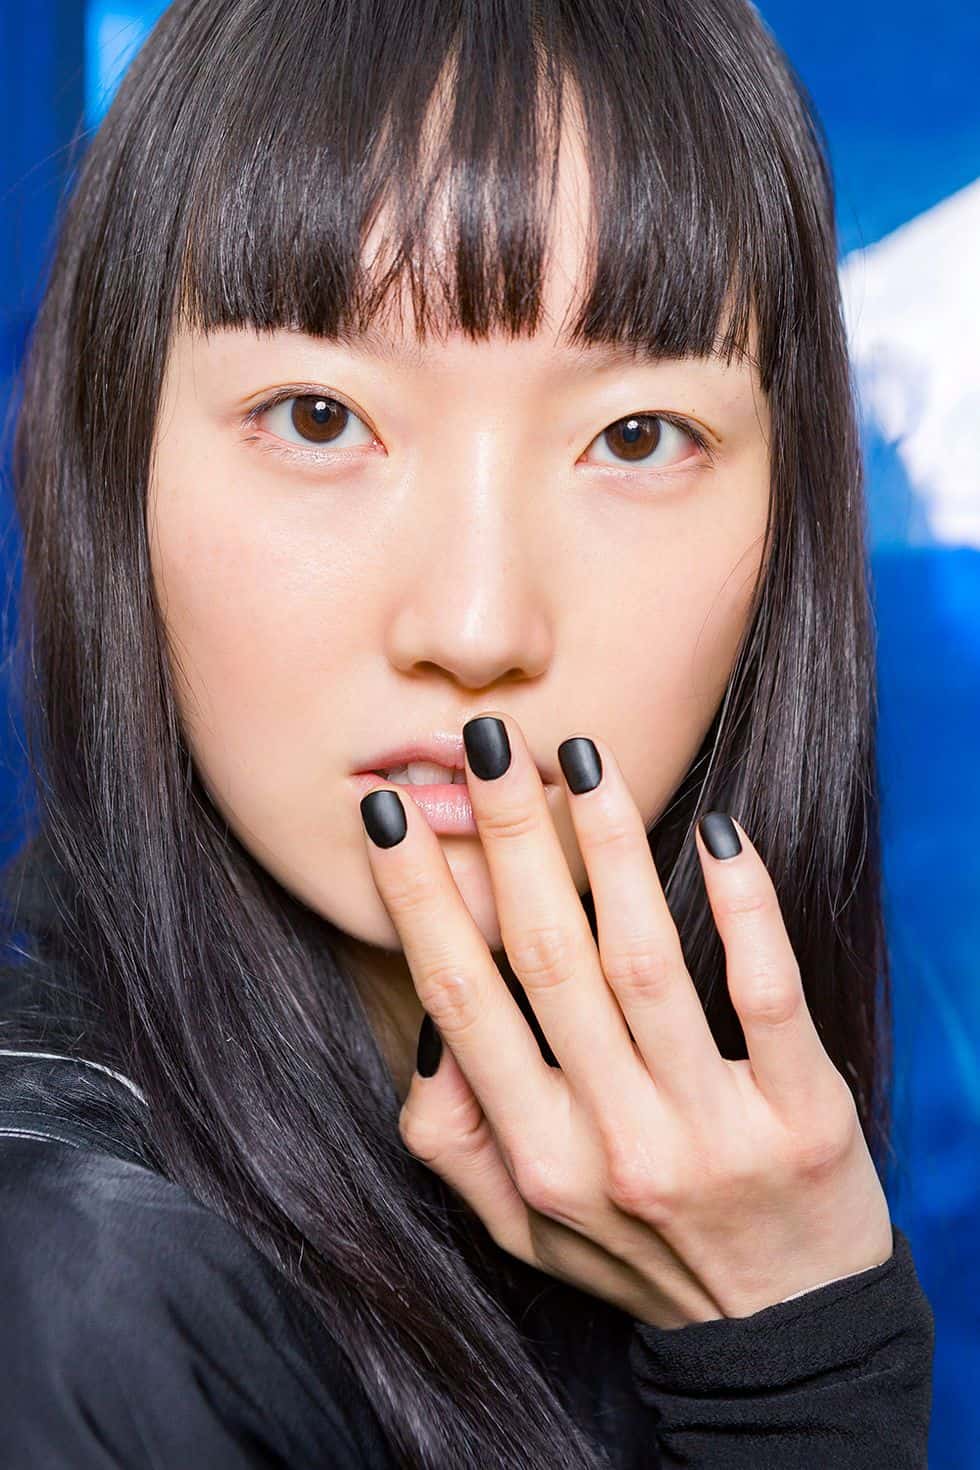 Classy Nails: 10 Best Shades & 40 Classy Nail Designs You Need To Try